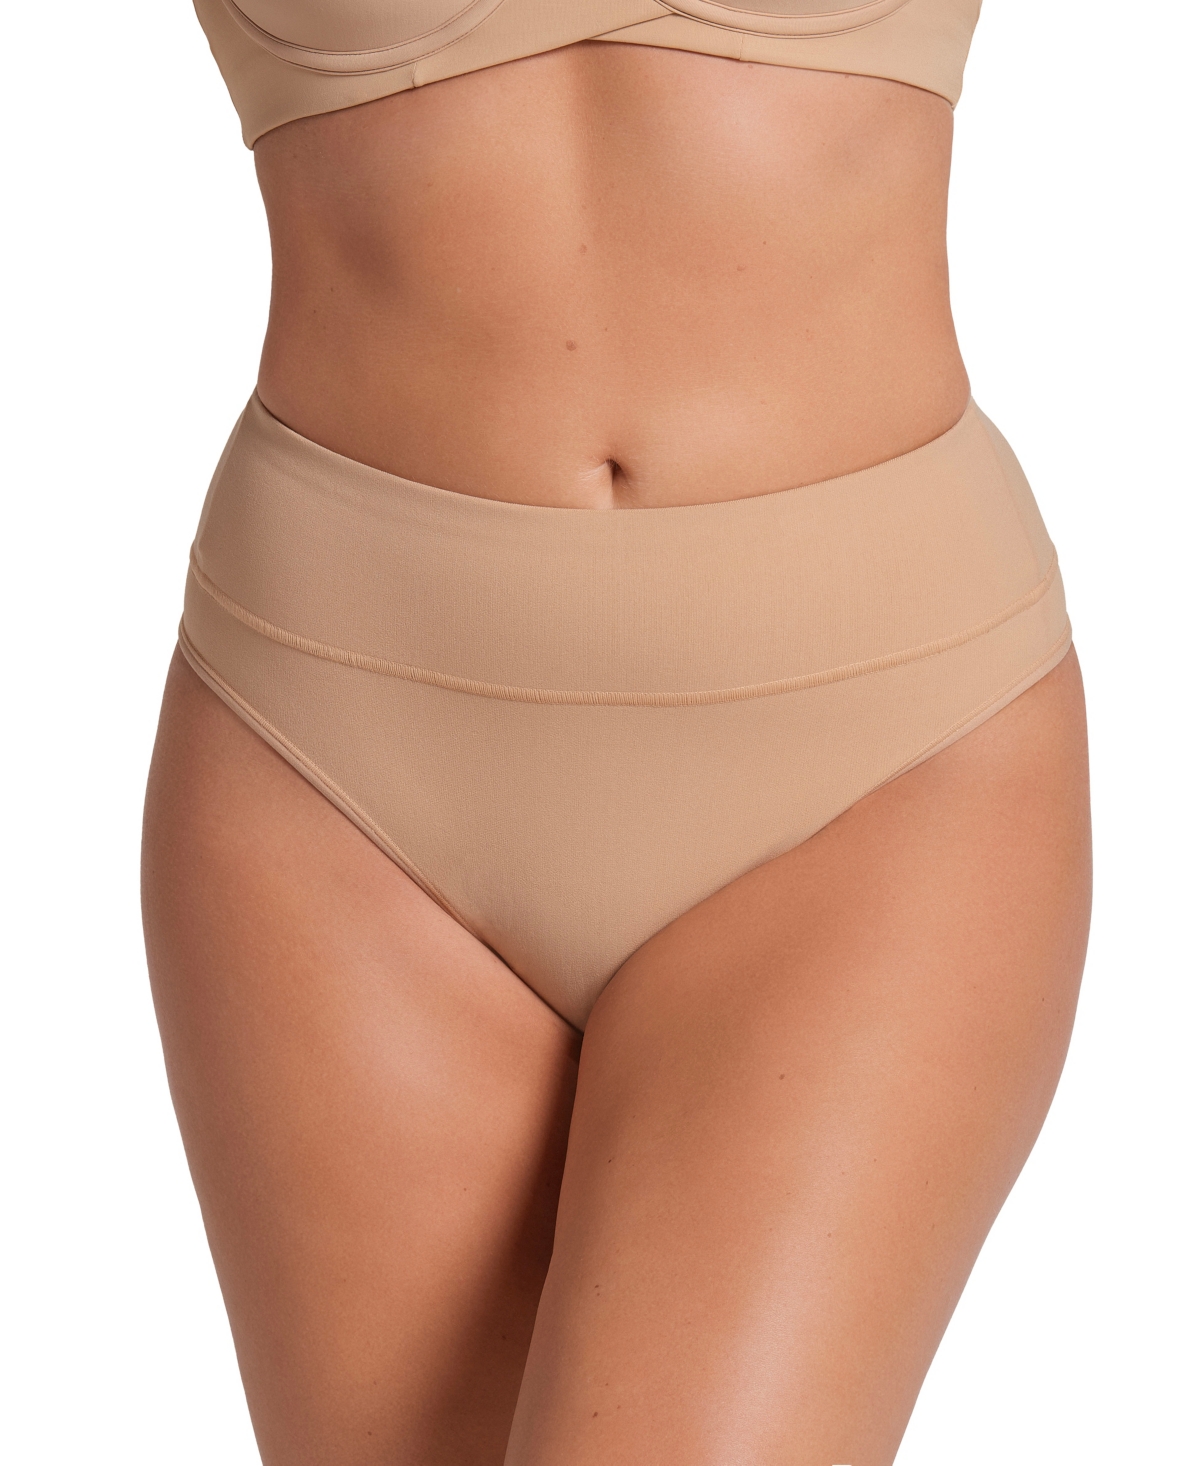 Leonisa Women's High-waisted Seamless Moderate Shaper Thong Panty In Light Beige